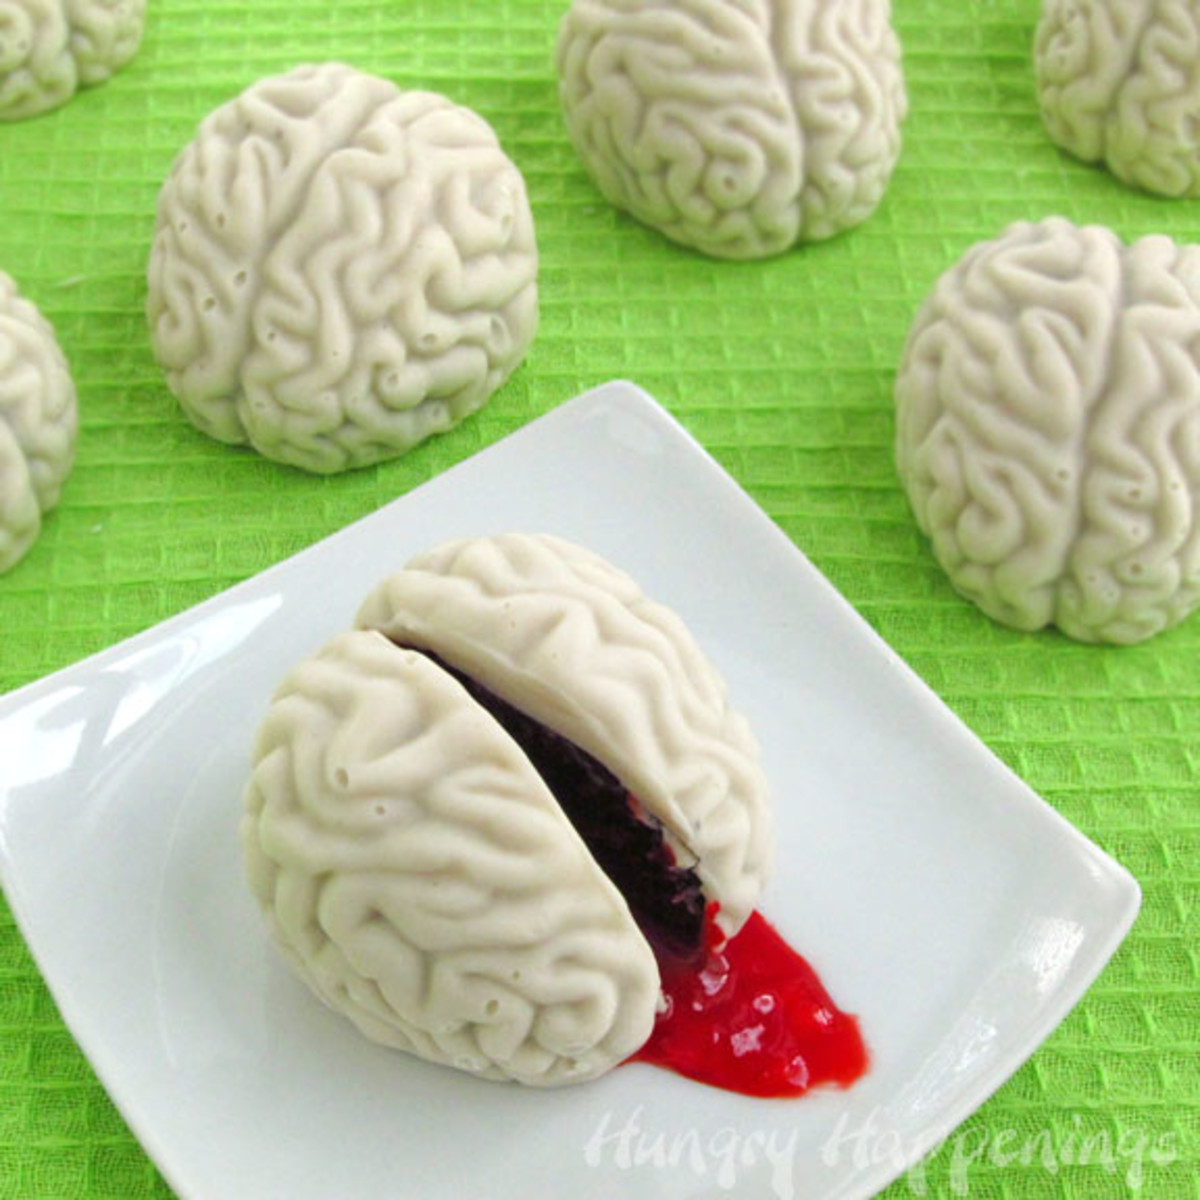 Cake Ball Brains Oozing Cherry Blood recipe from HungryHappenings.com